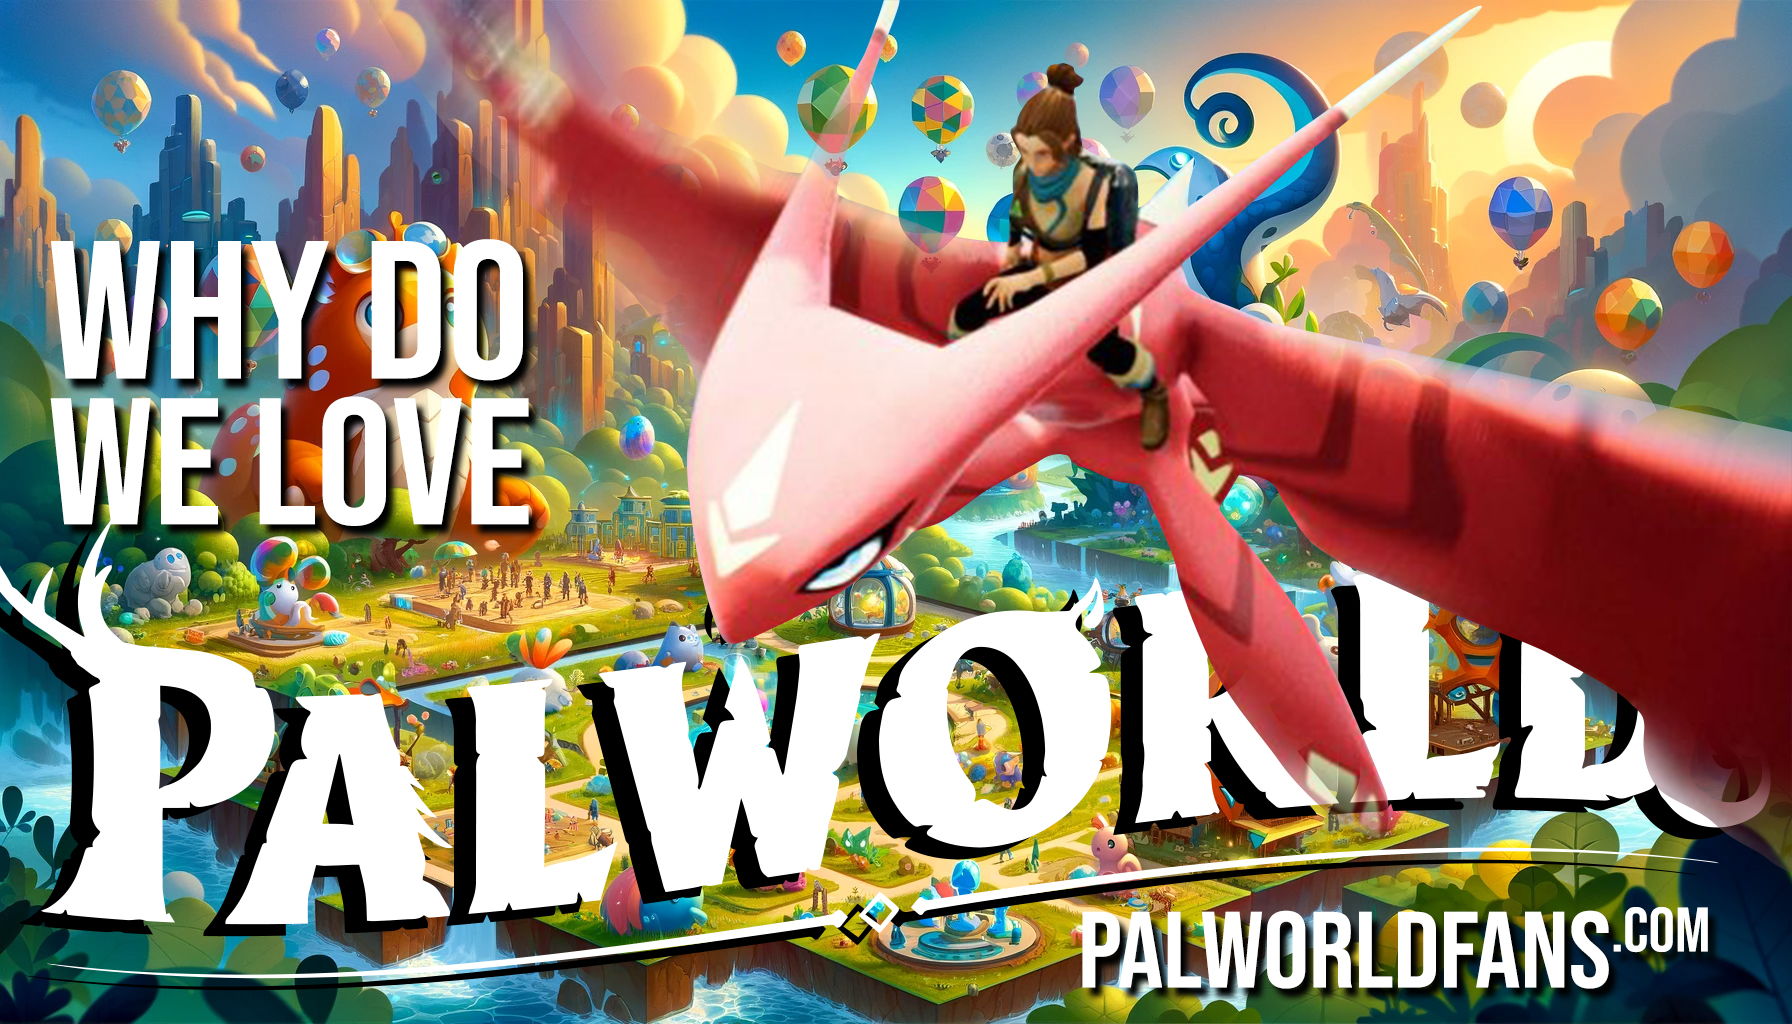 Why do we love Palworld?